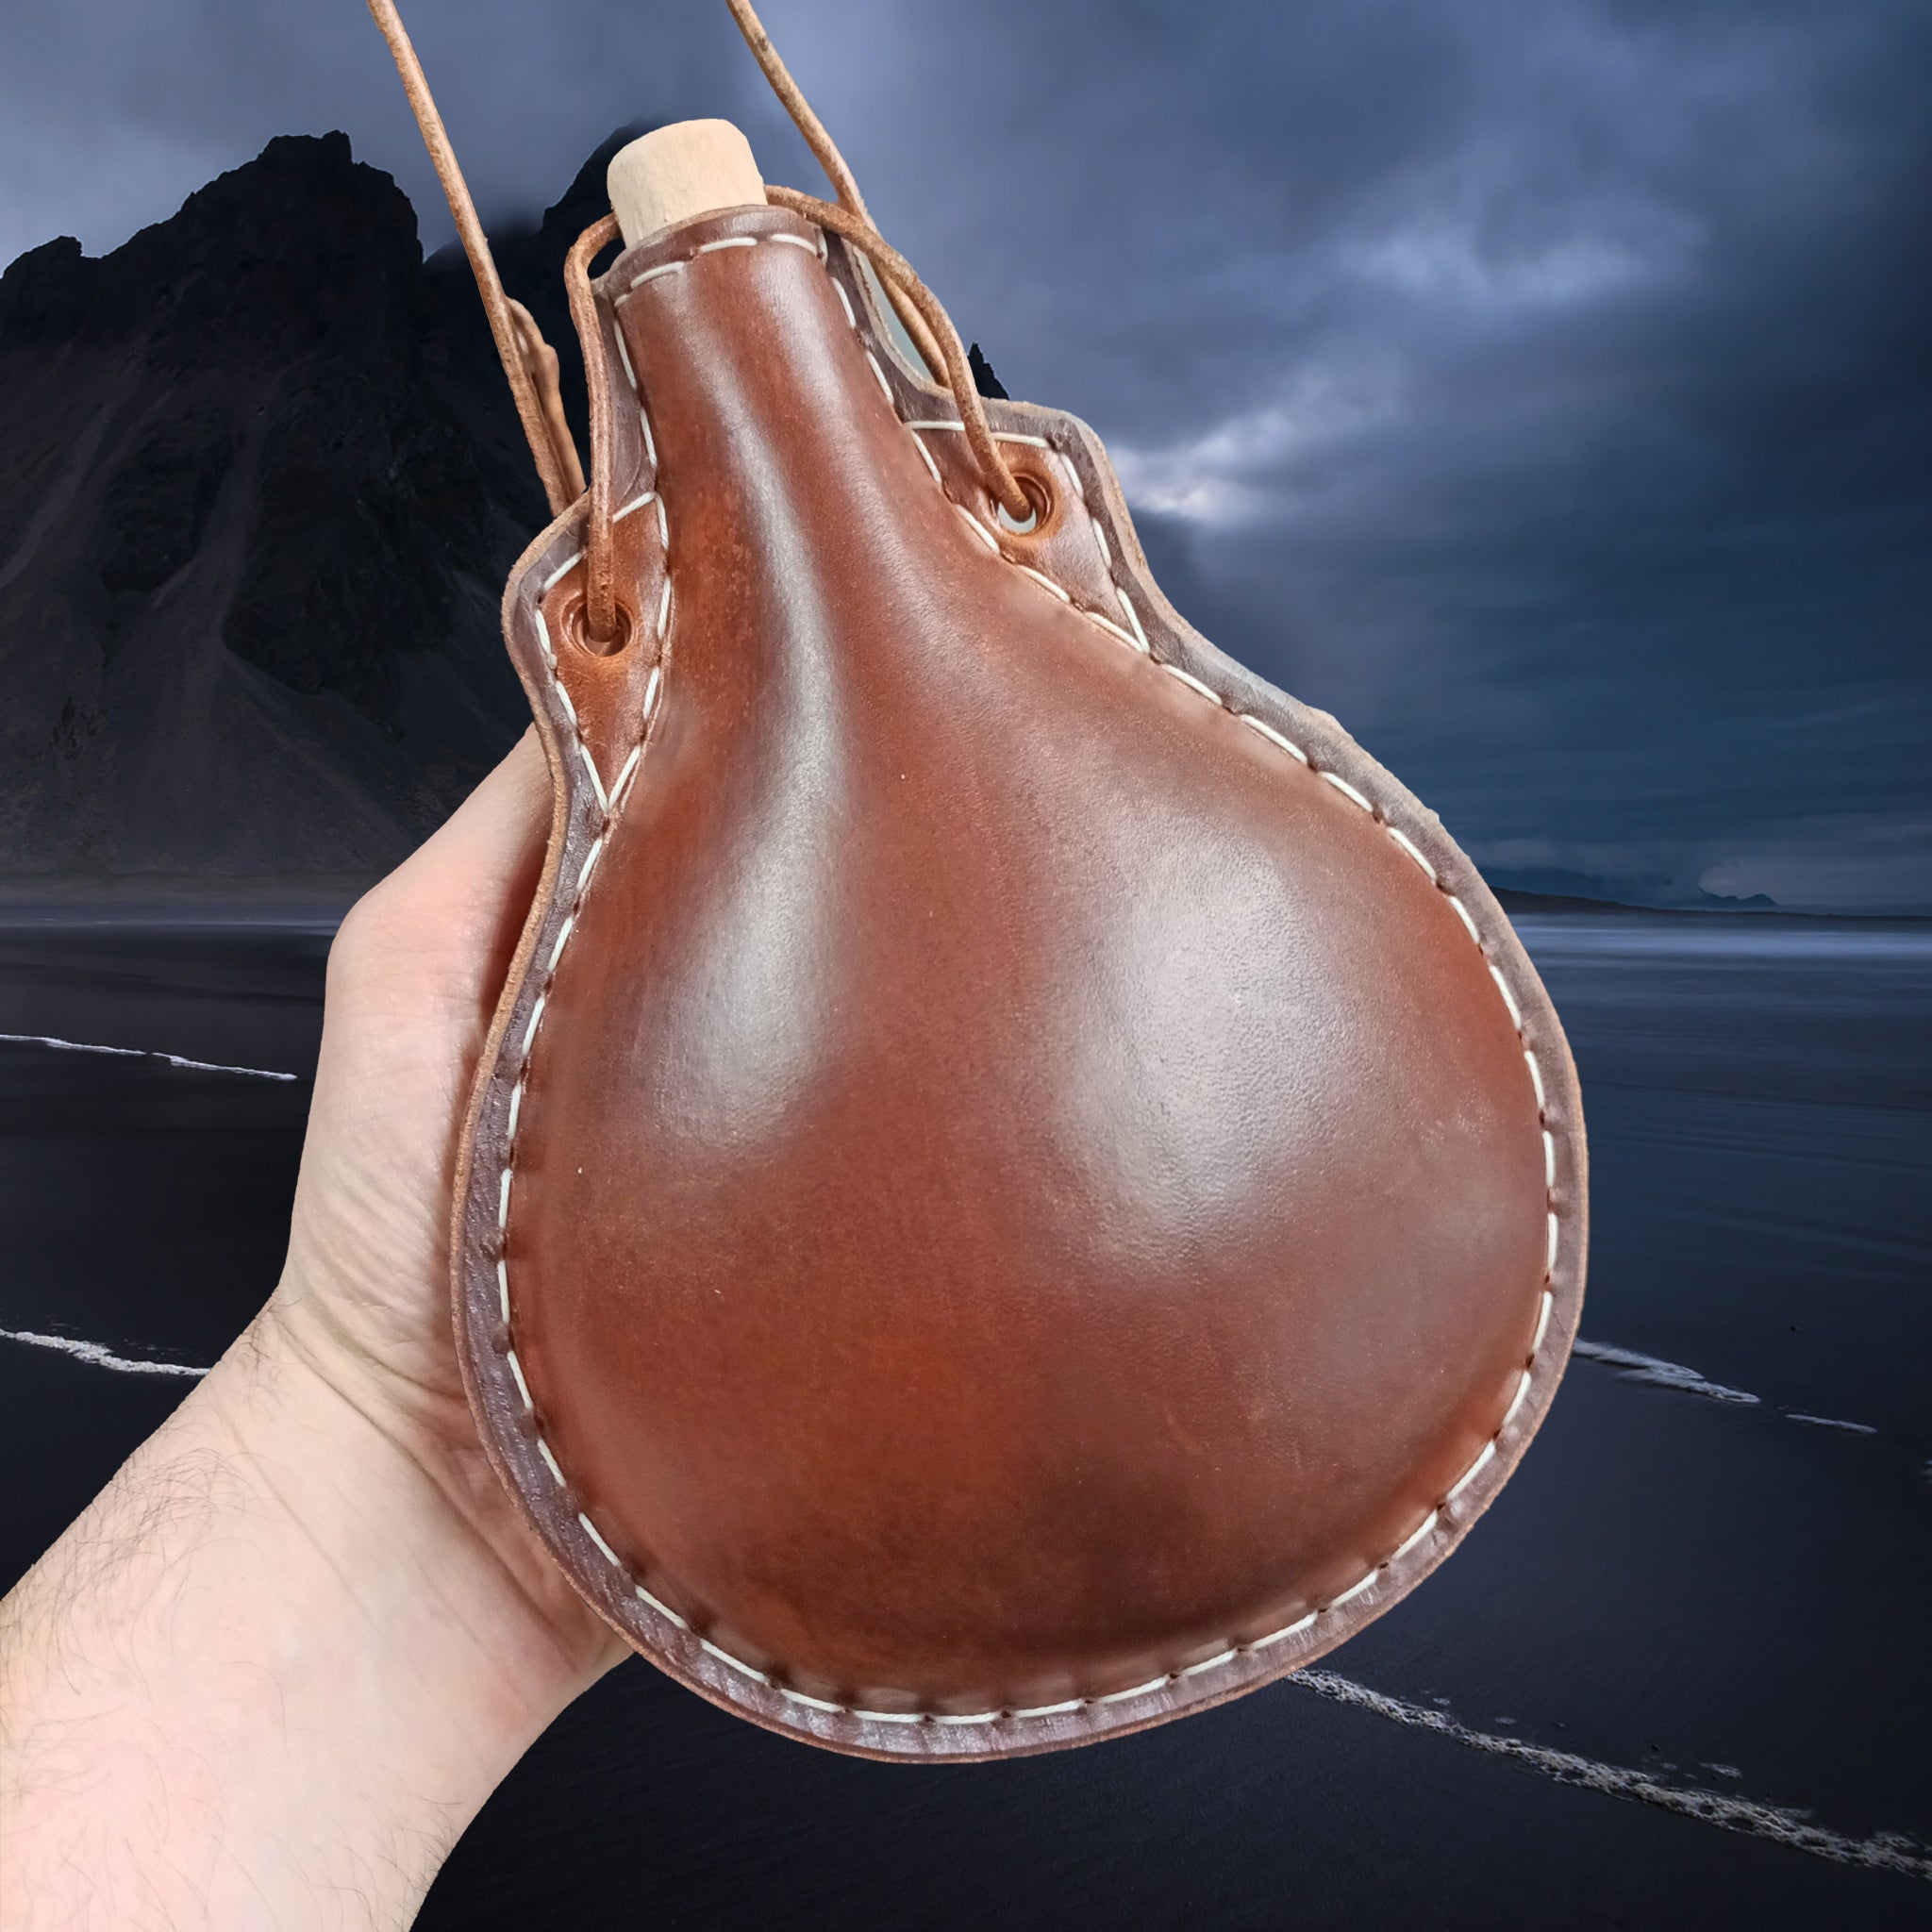 Handmade Thick Boiled Leather Water Bottle with Wood Stopper & Leather Thong Strap in Hand